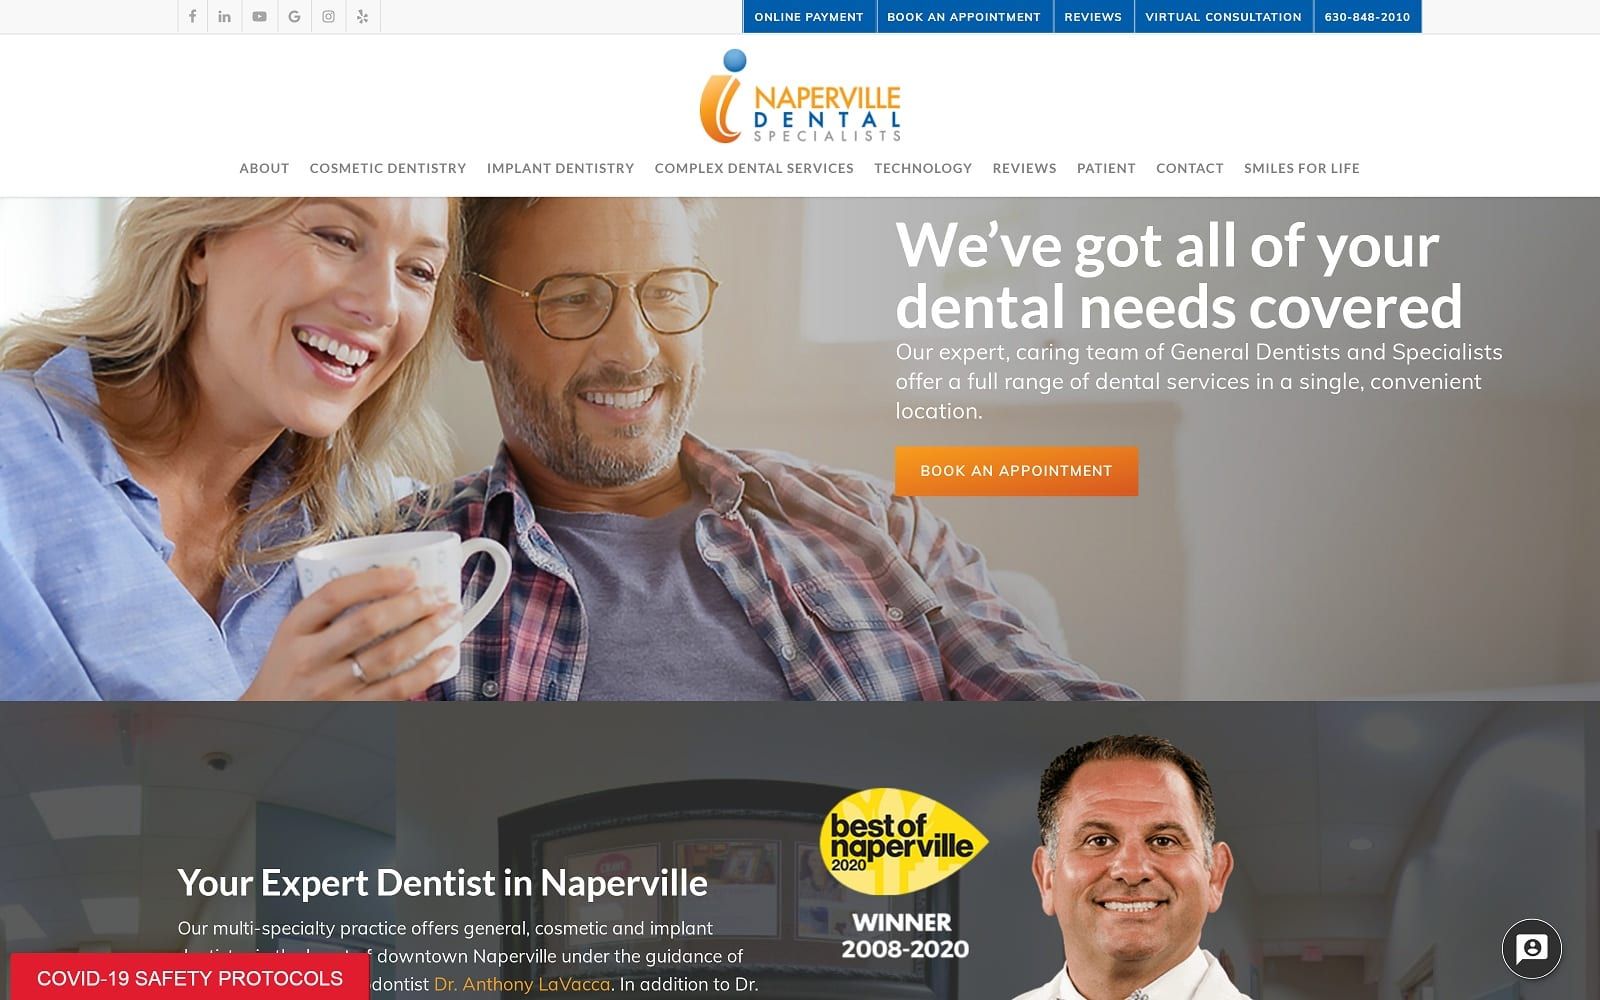 The screenshot of naperville dental specialists ndscare. Com dr. Anthony lavacca website